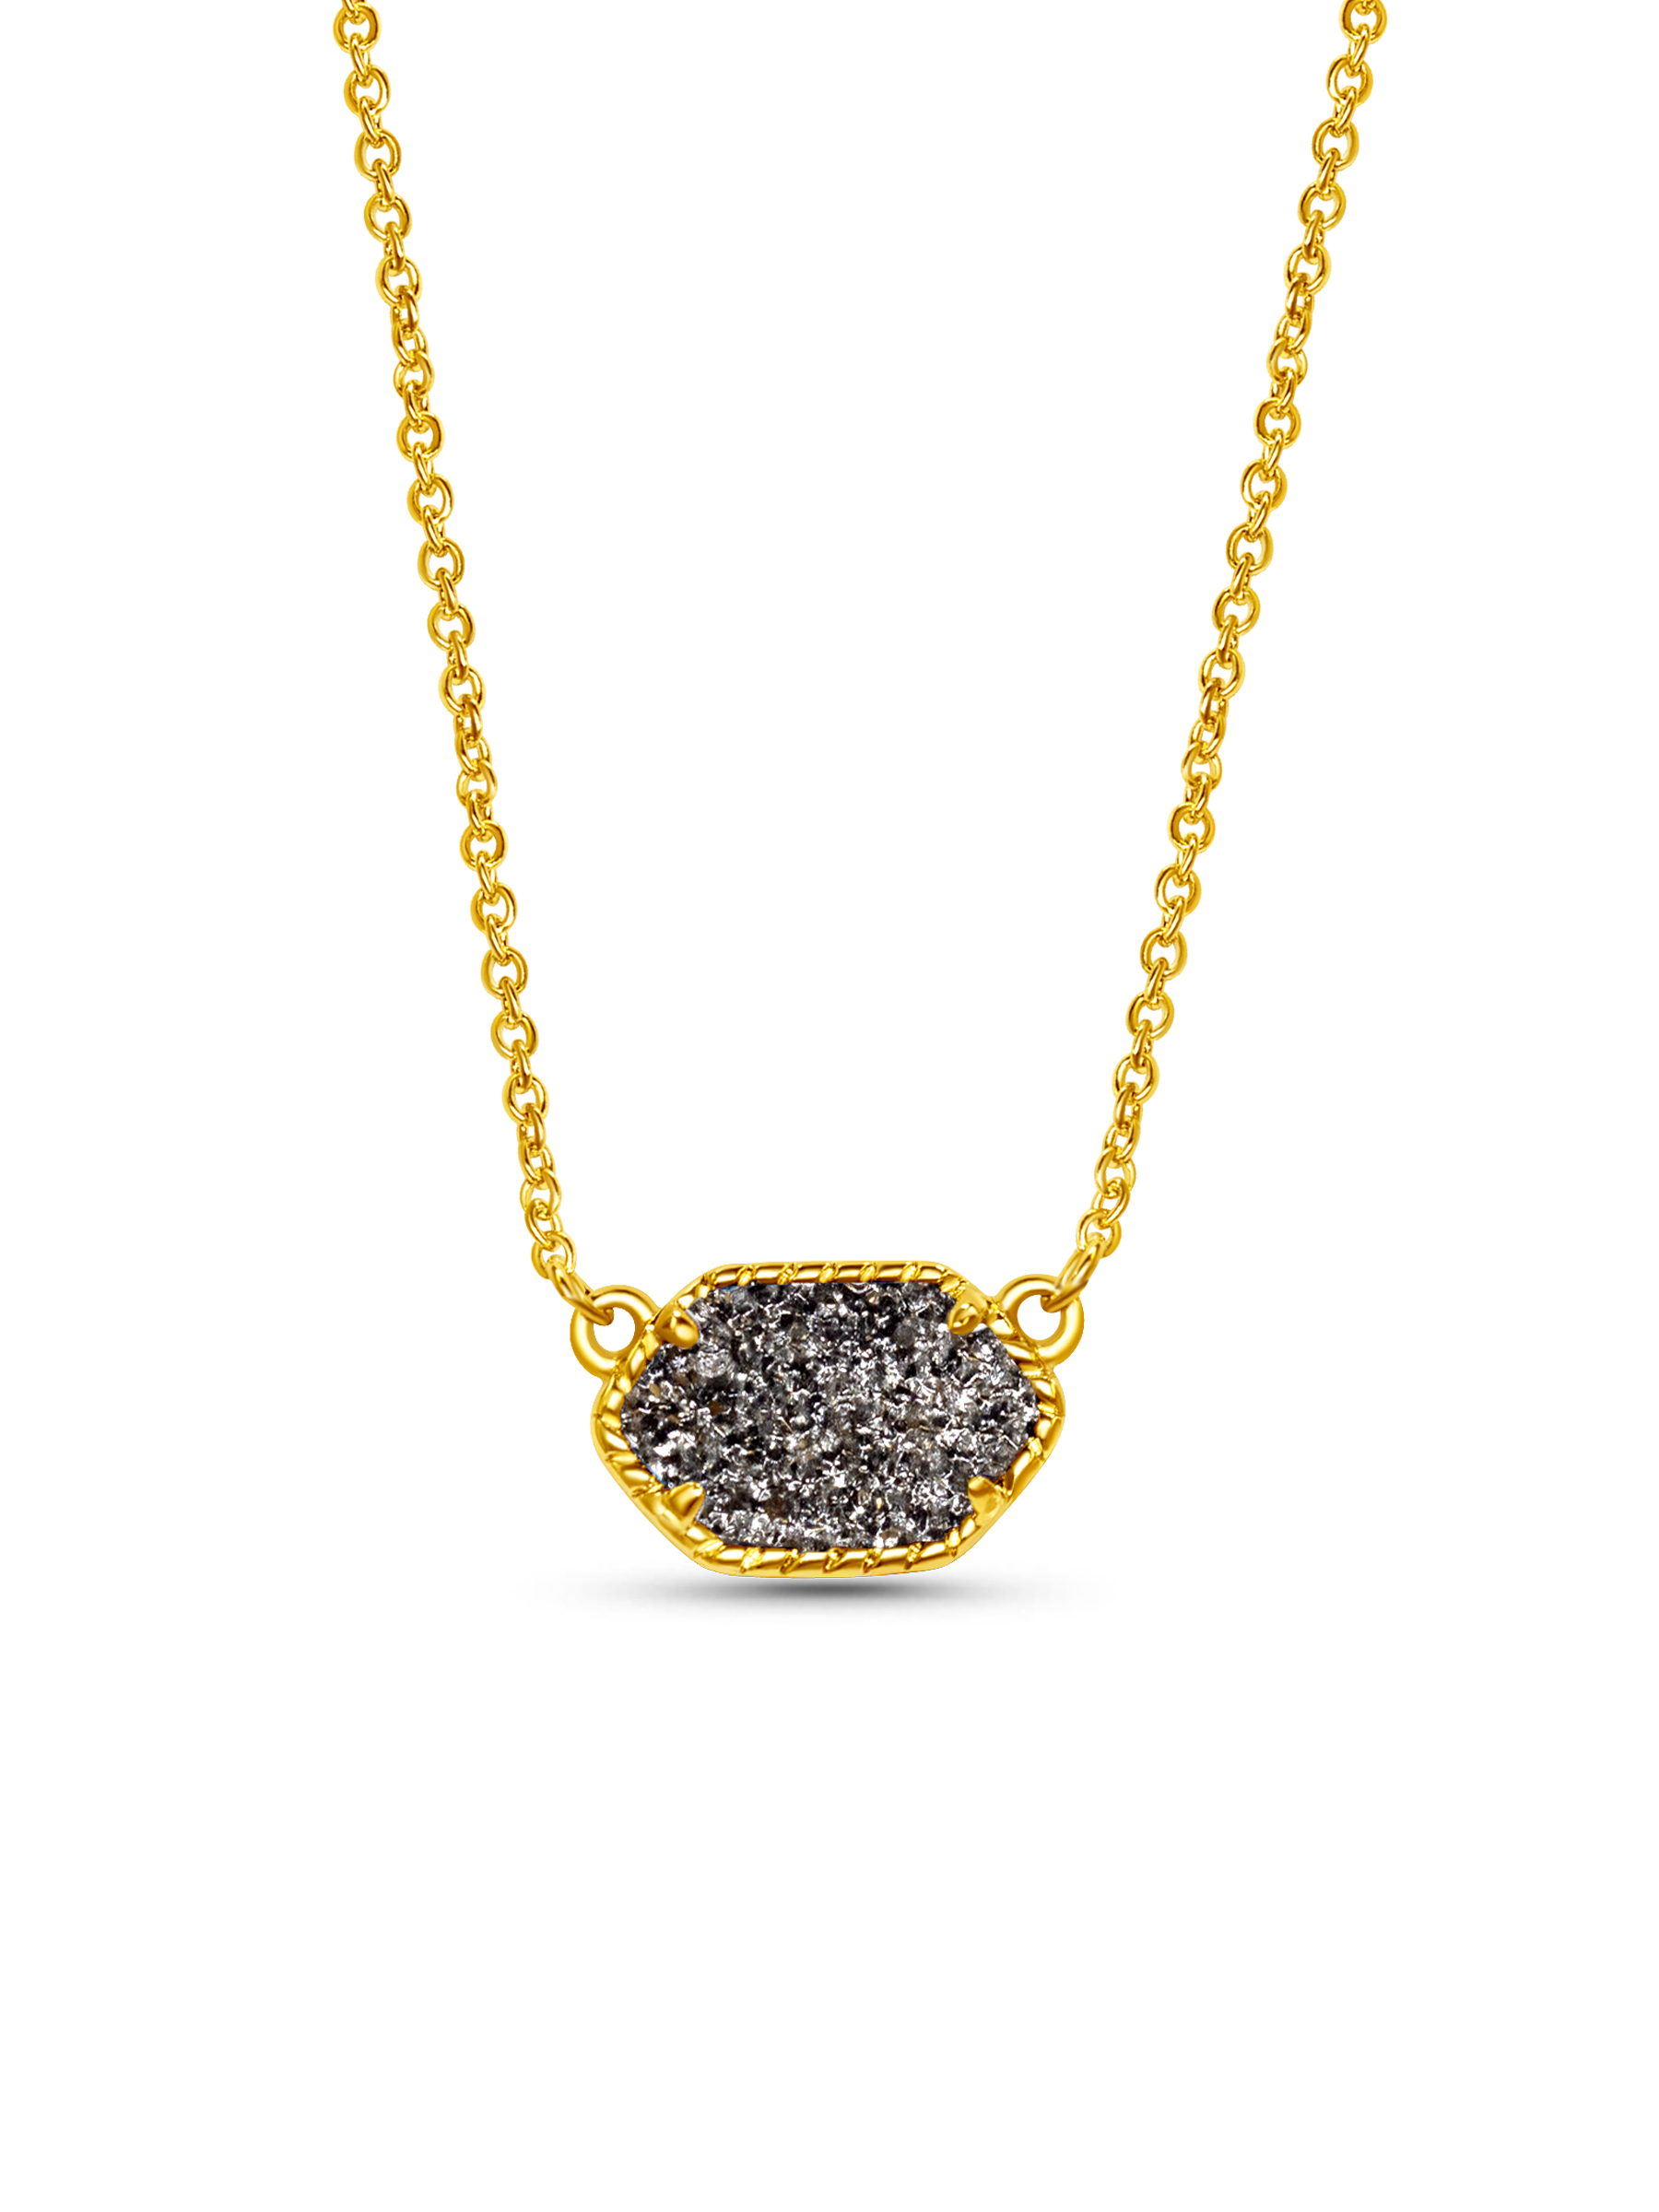 Sapphire Pendant Necklace 18K Gold Plated